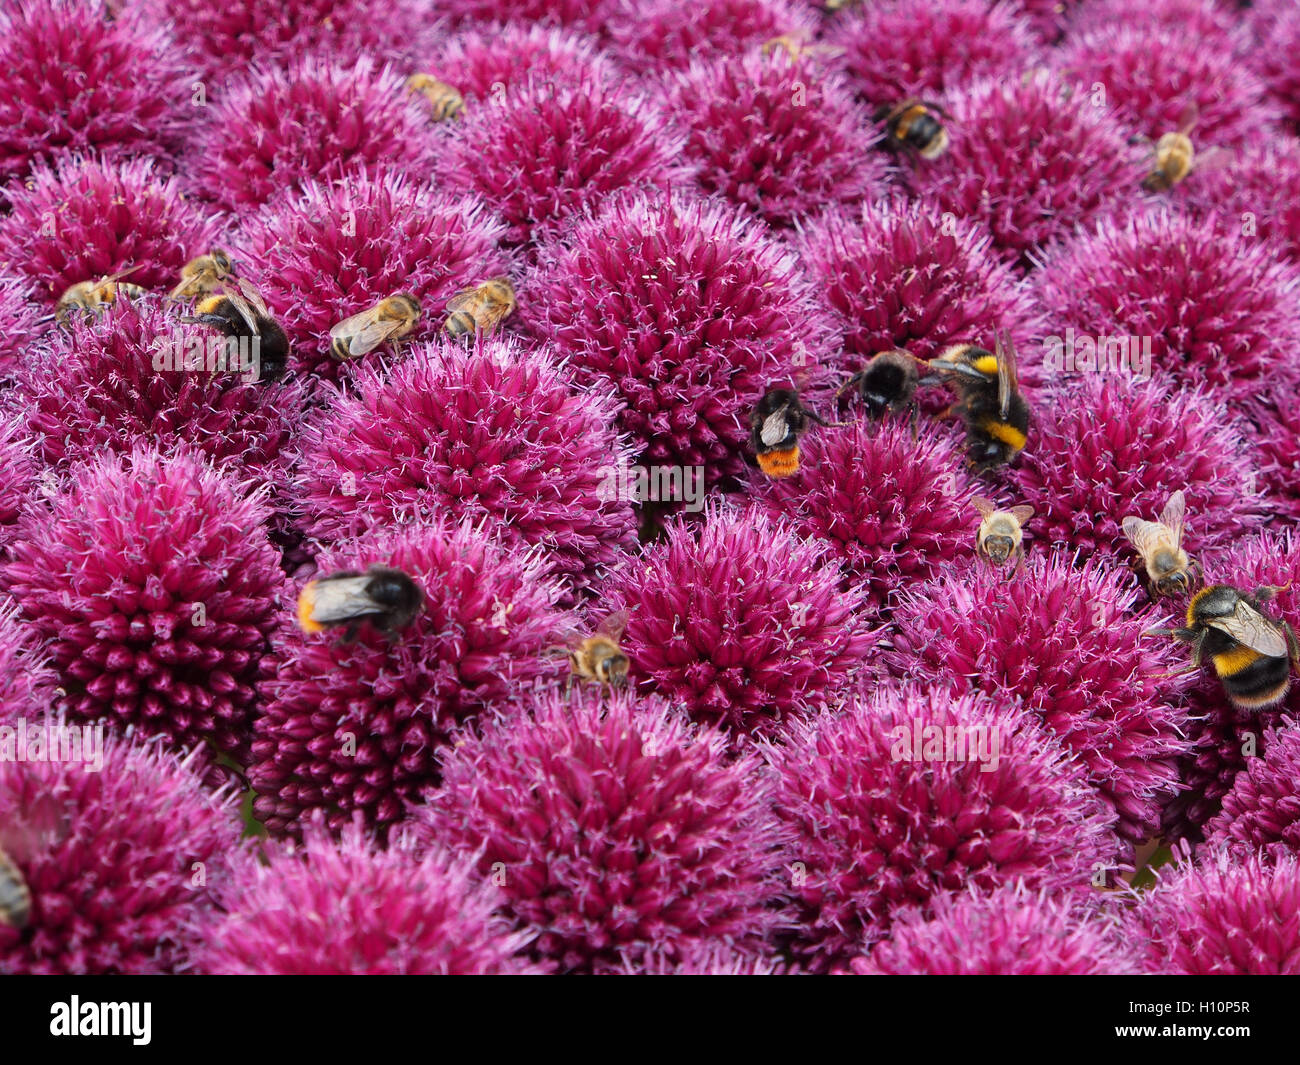 Close up shot of allium globemaster, with purple ball flowers, taken at Tatton Park RHS flower show, Cheshire. They were covered with bees foraging. Stock Photo